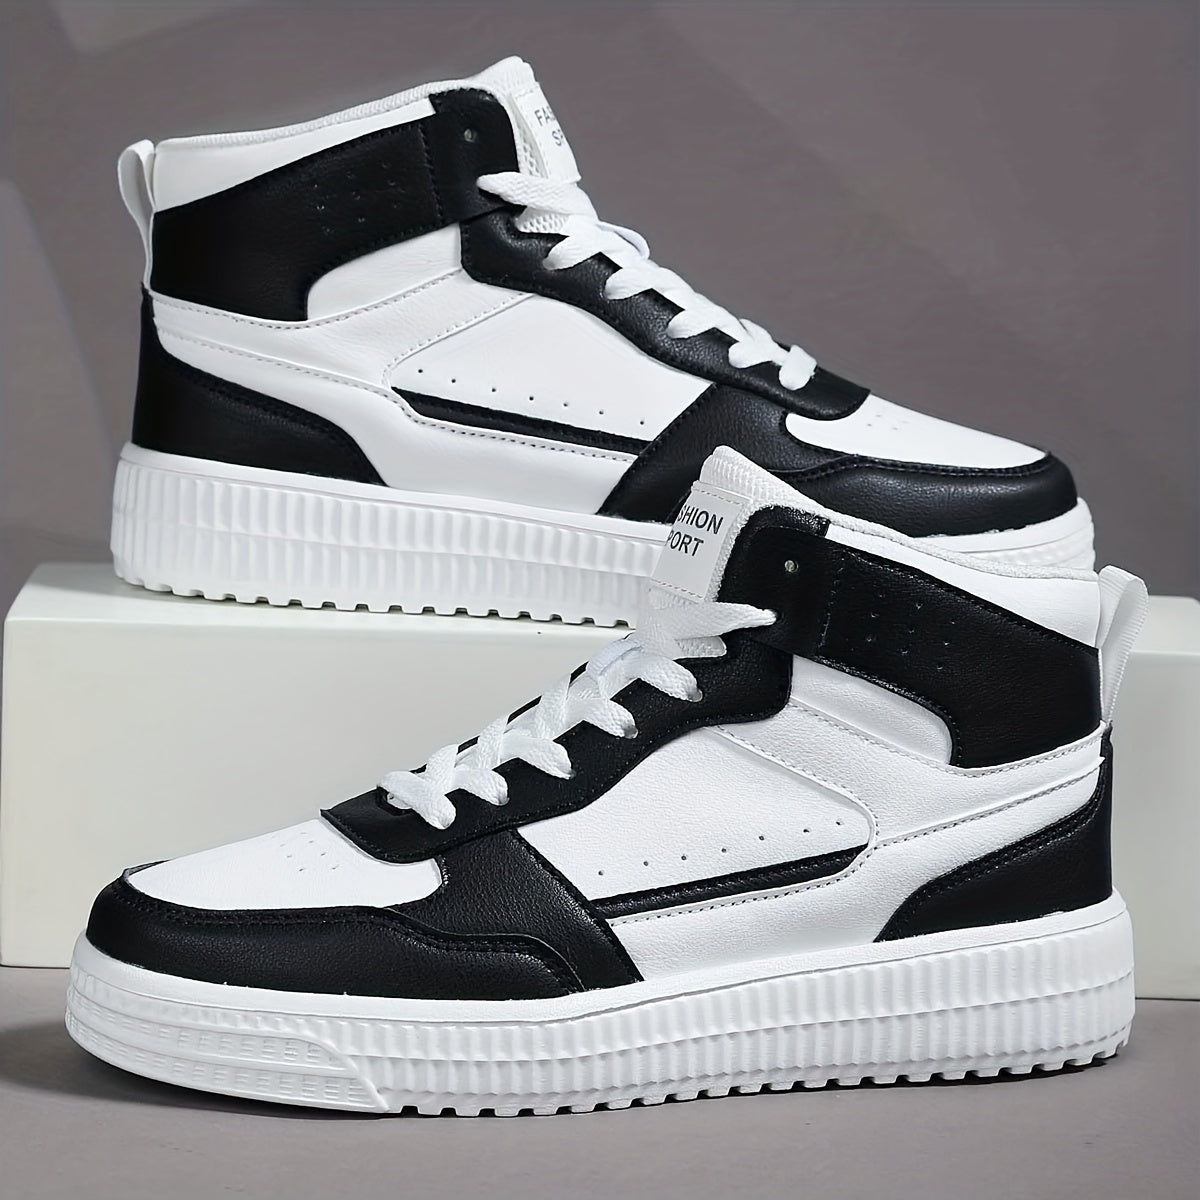 High Top Skate Shoes With Good Grip, Lace-up Sneakers